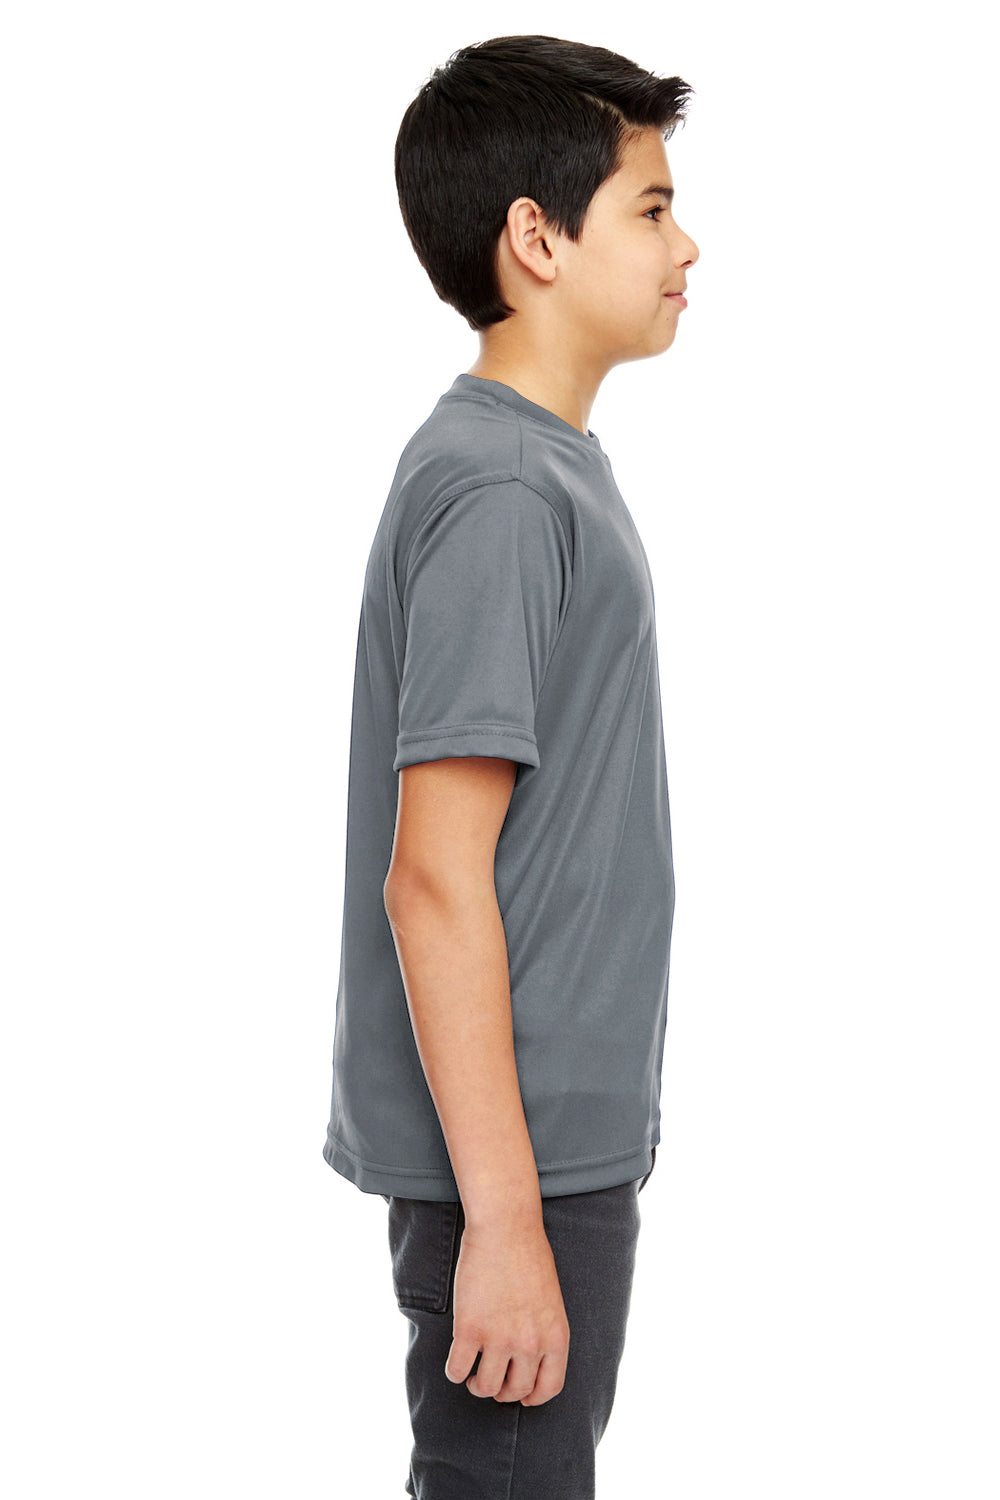 UltraClub 8620Y Youth Cool & Dry Performance Moisture Wicking Short Sleeve Crewneck T-Shirt Charcoal Grey Side